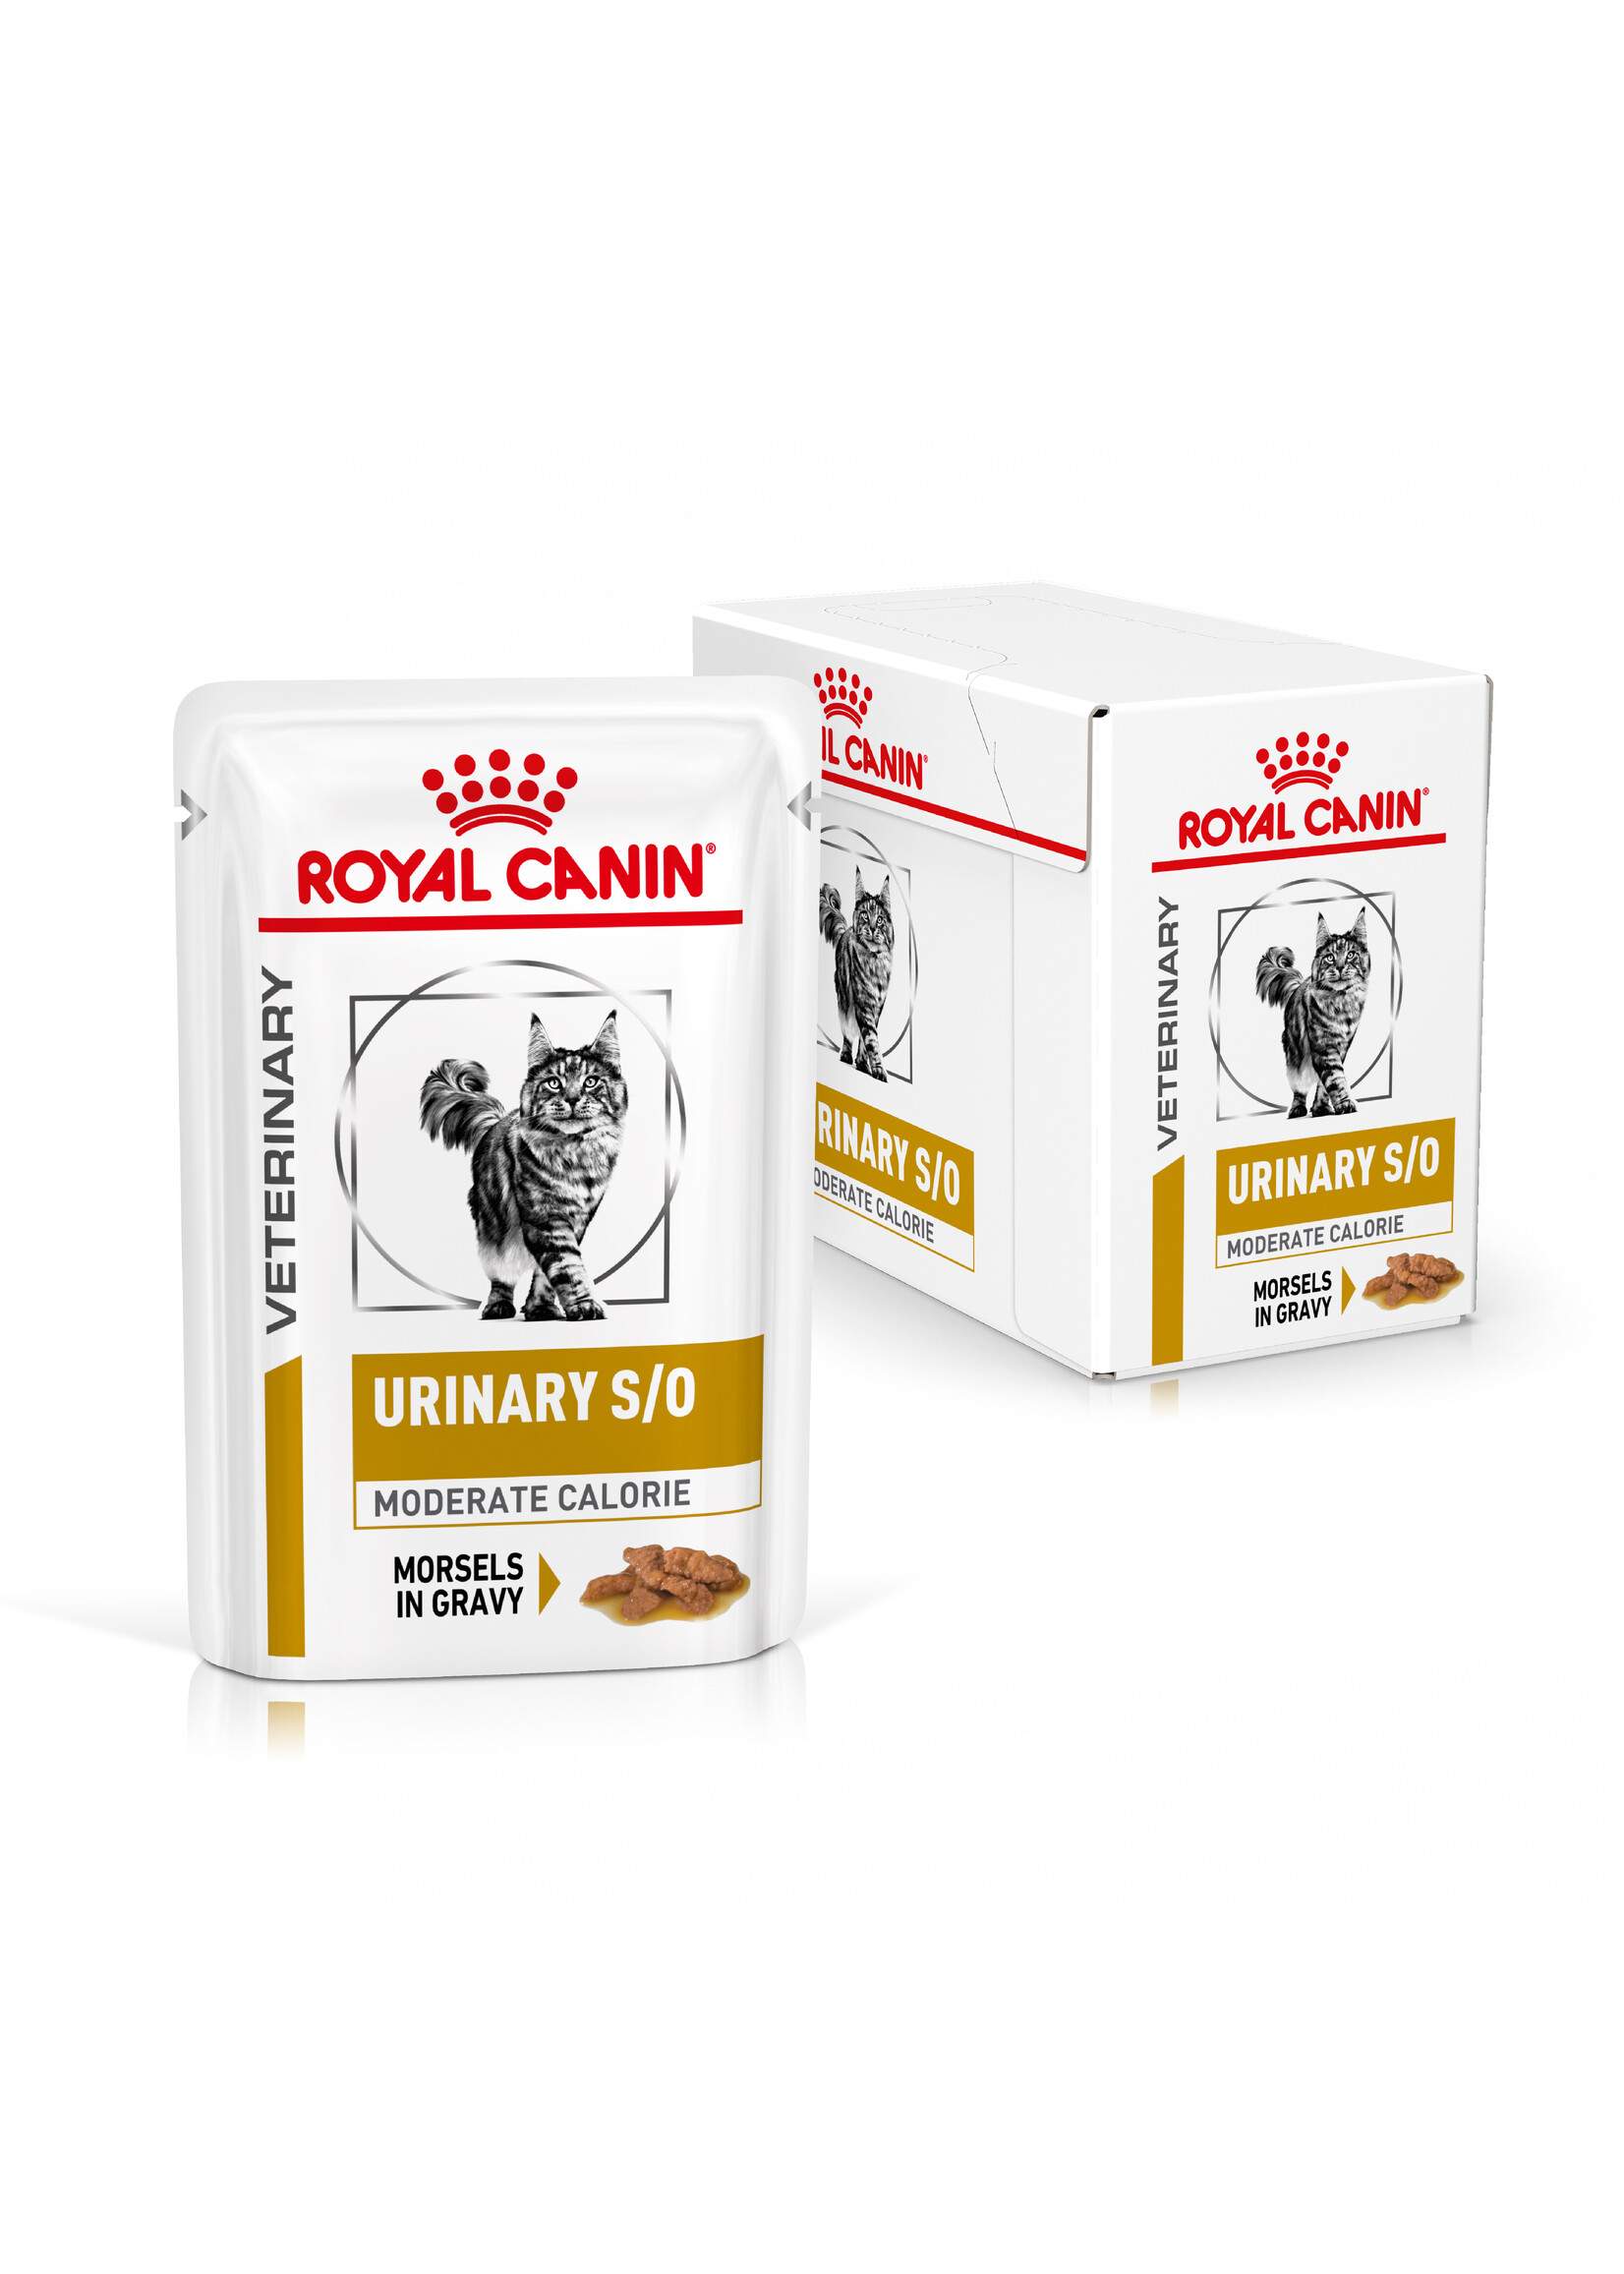 Royal Canin Royal Canin Urinary S/O Moderate Calorie Katze - Frischebeutels